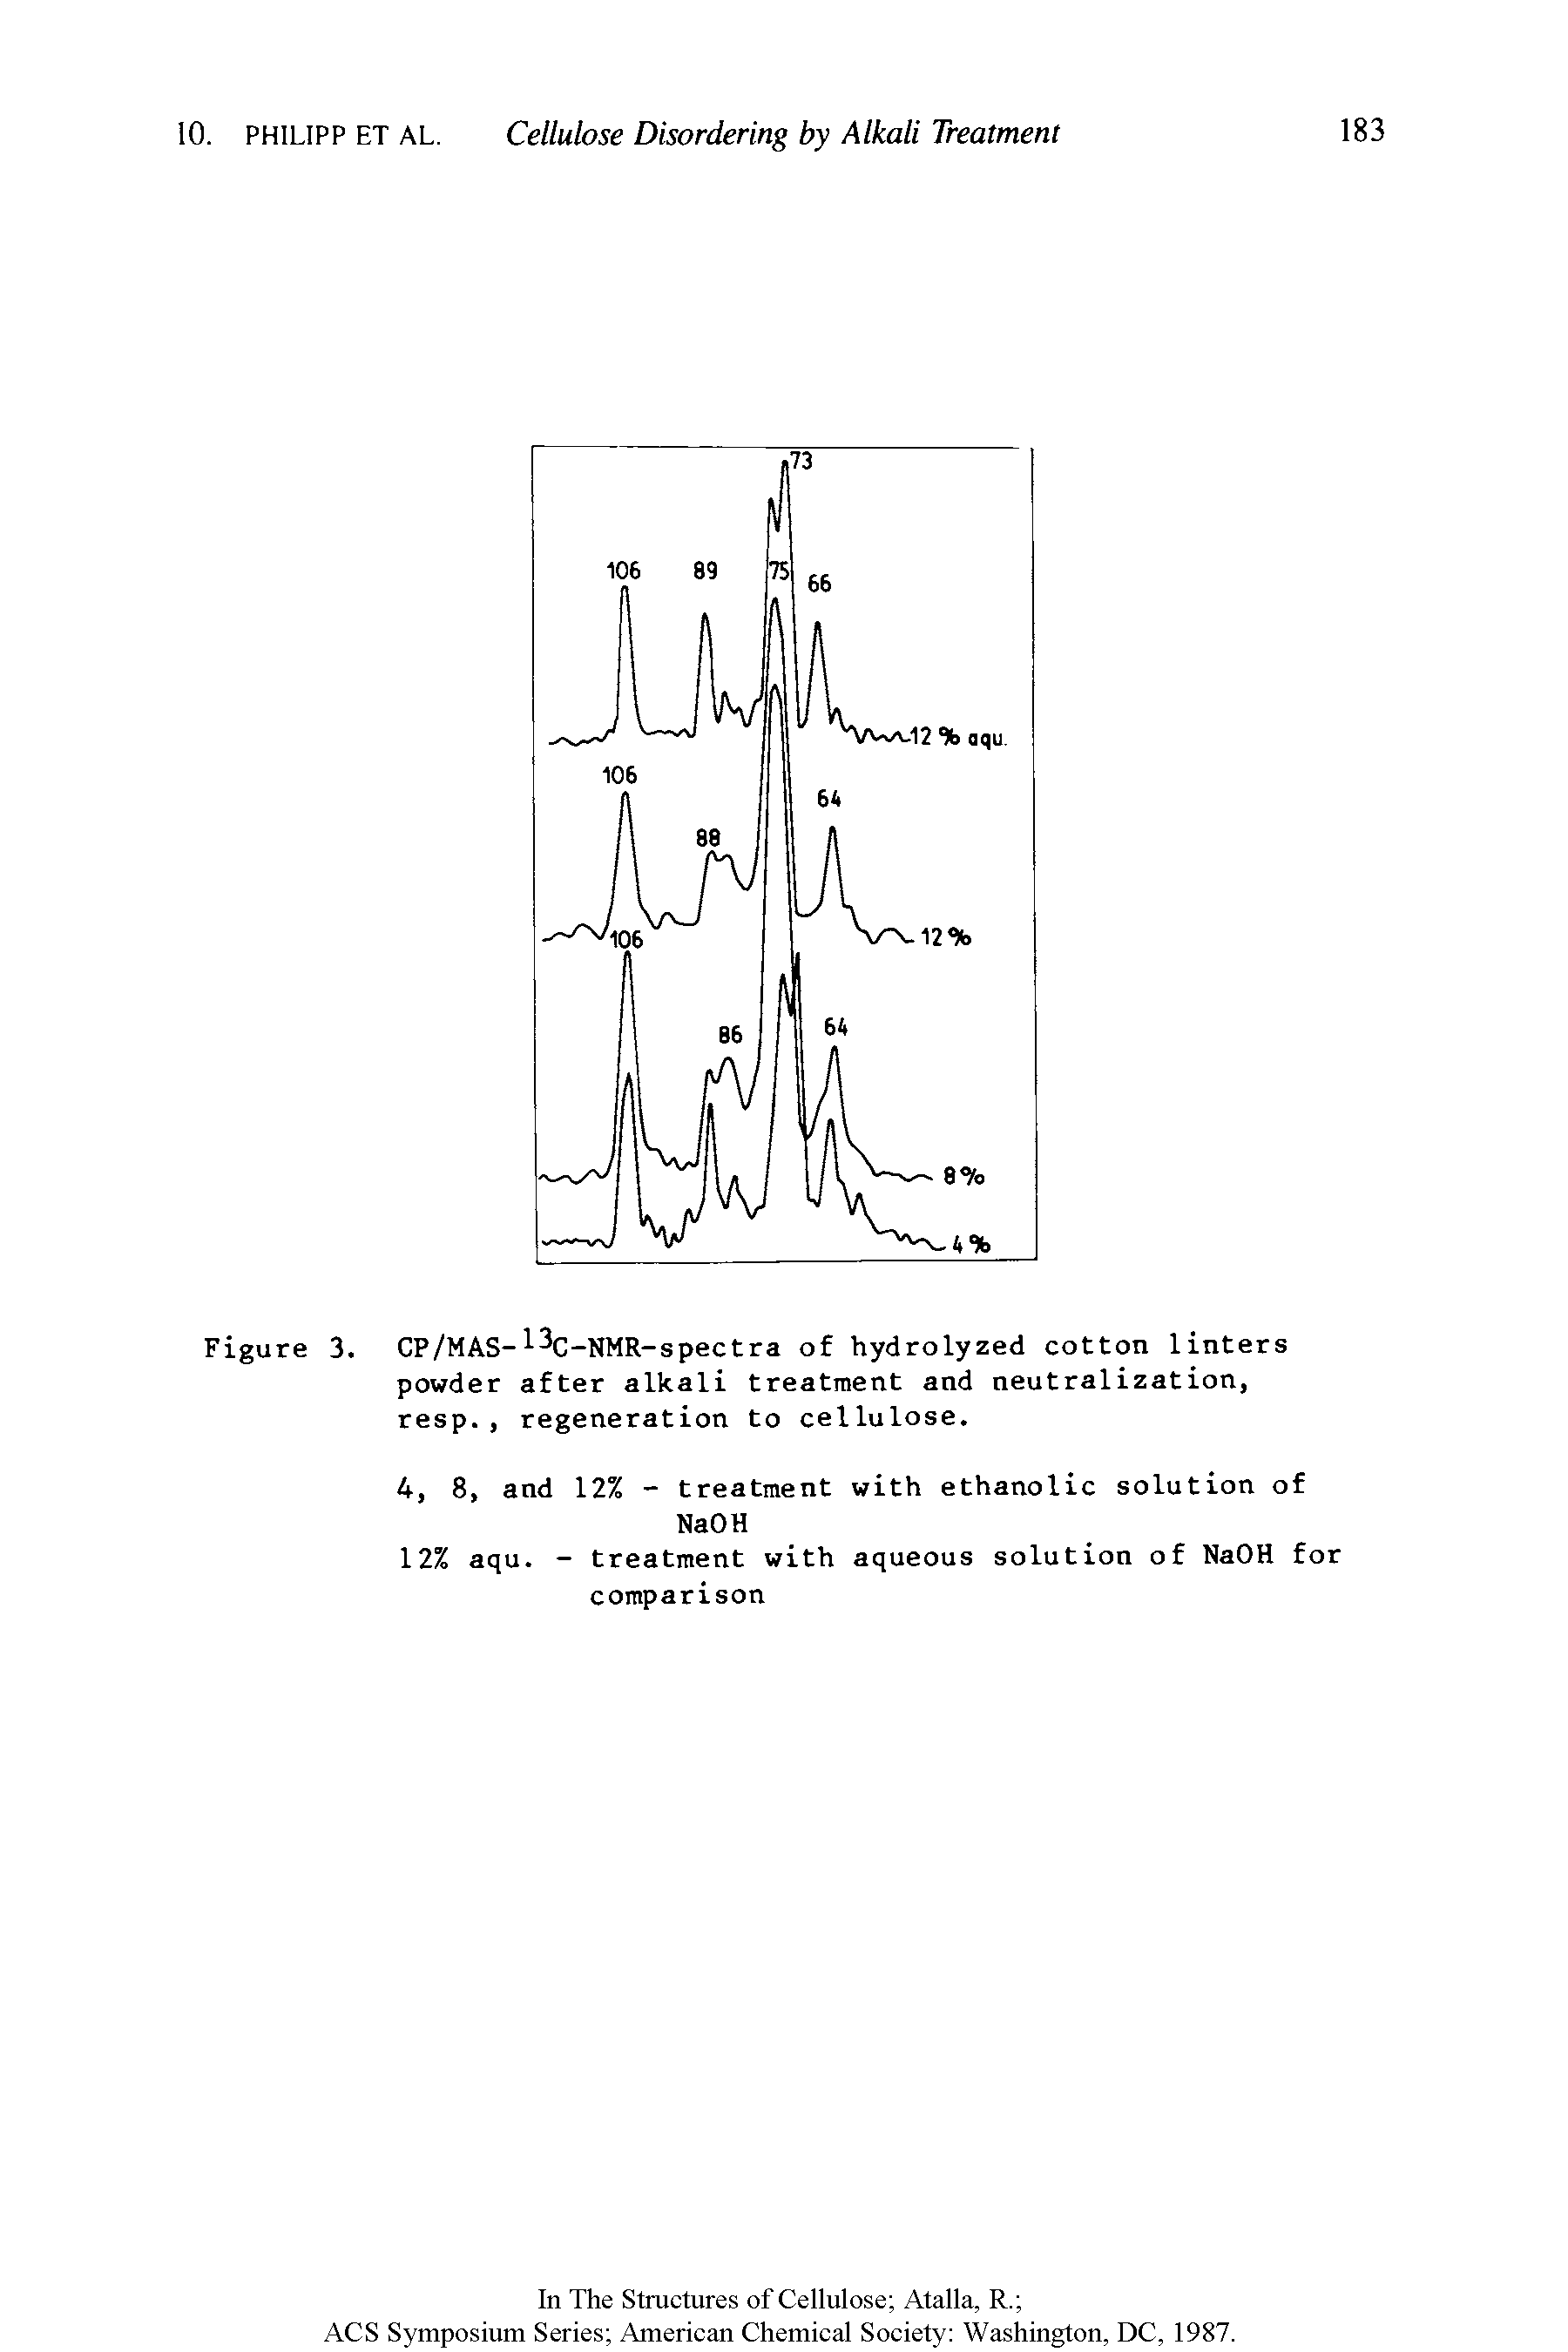 Figure 3. CP/MAS- C-NMR-spectra of hydrolyzed cotton linters powder after alkali treatment and neutralization, resp., regeneration to cellulose.